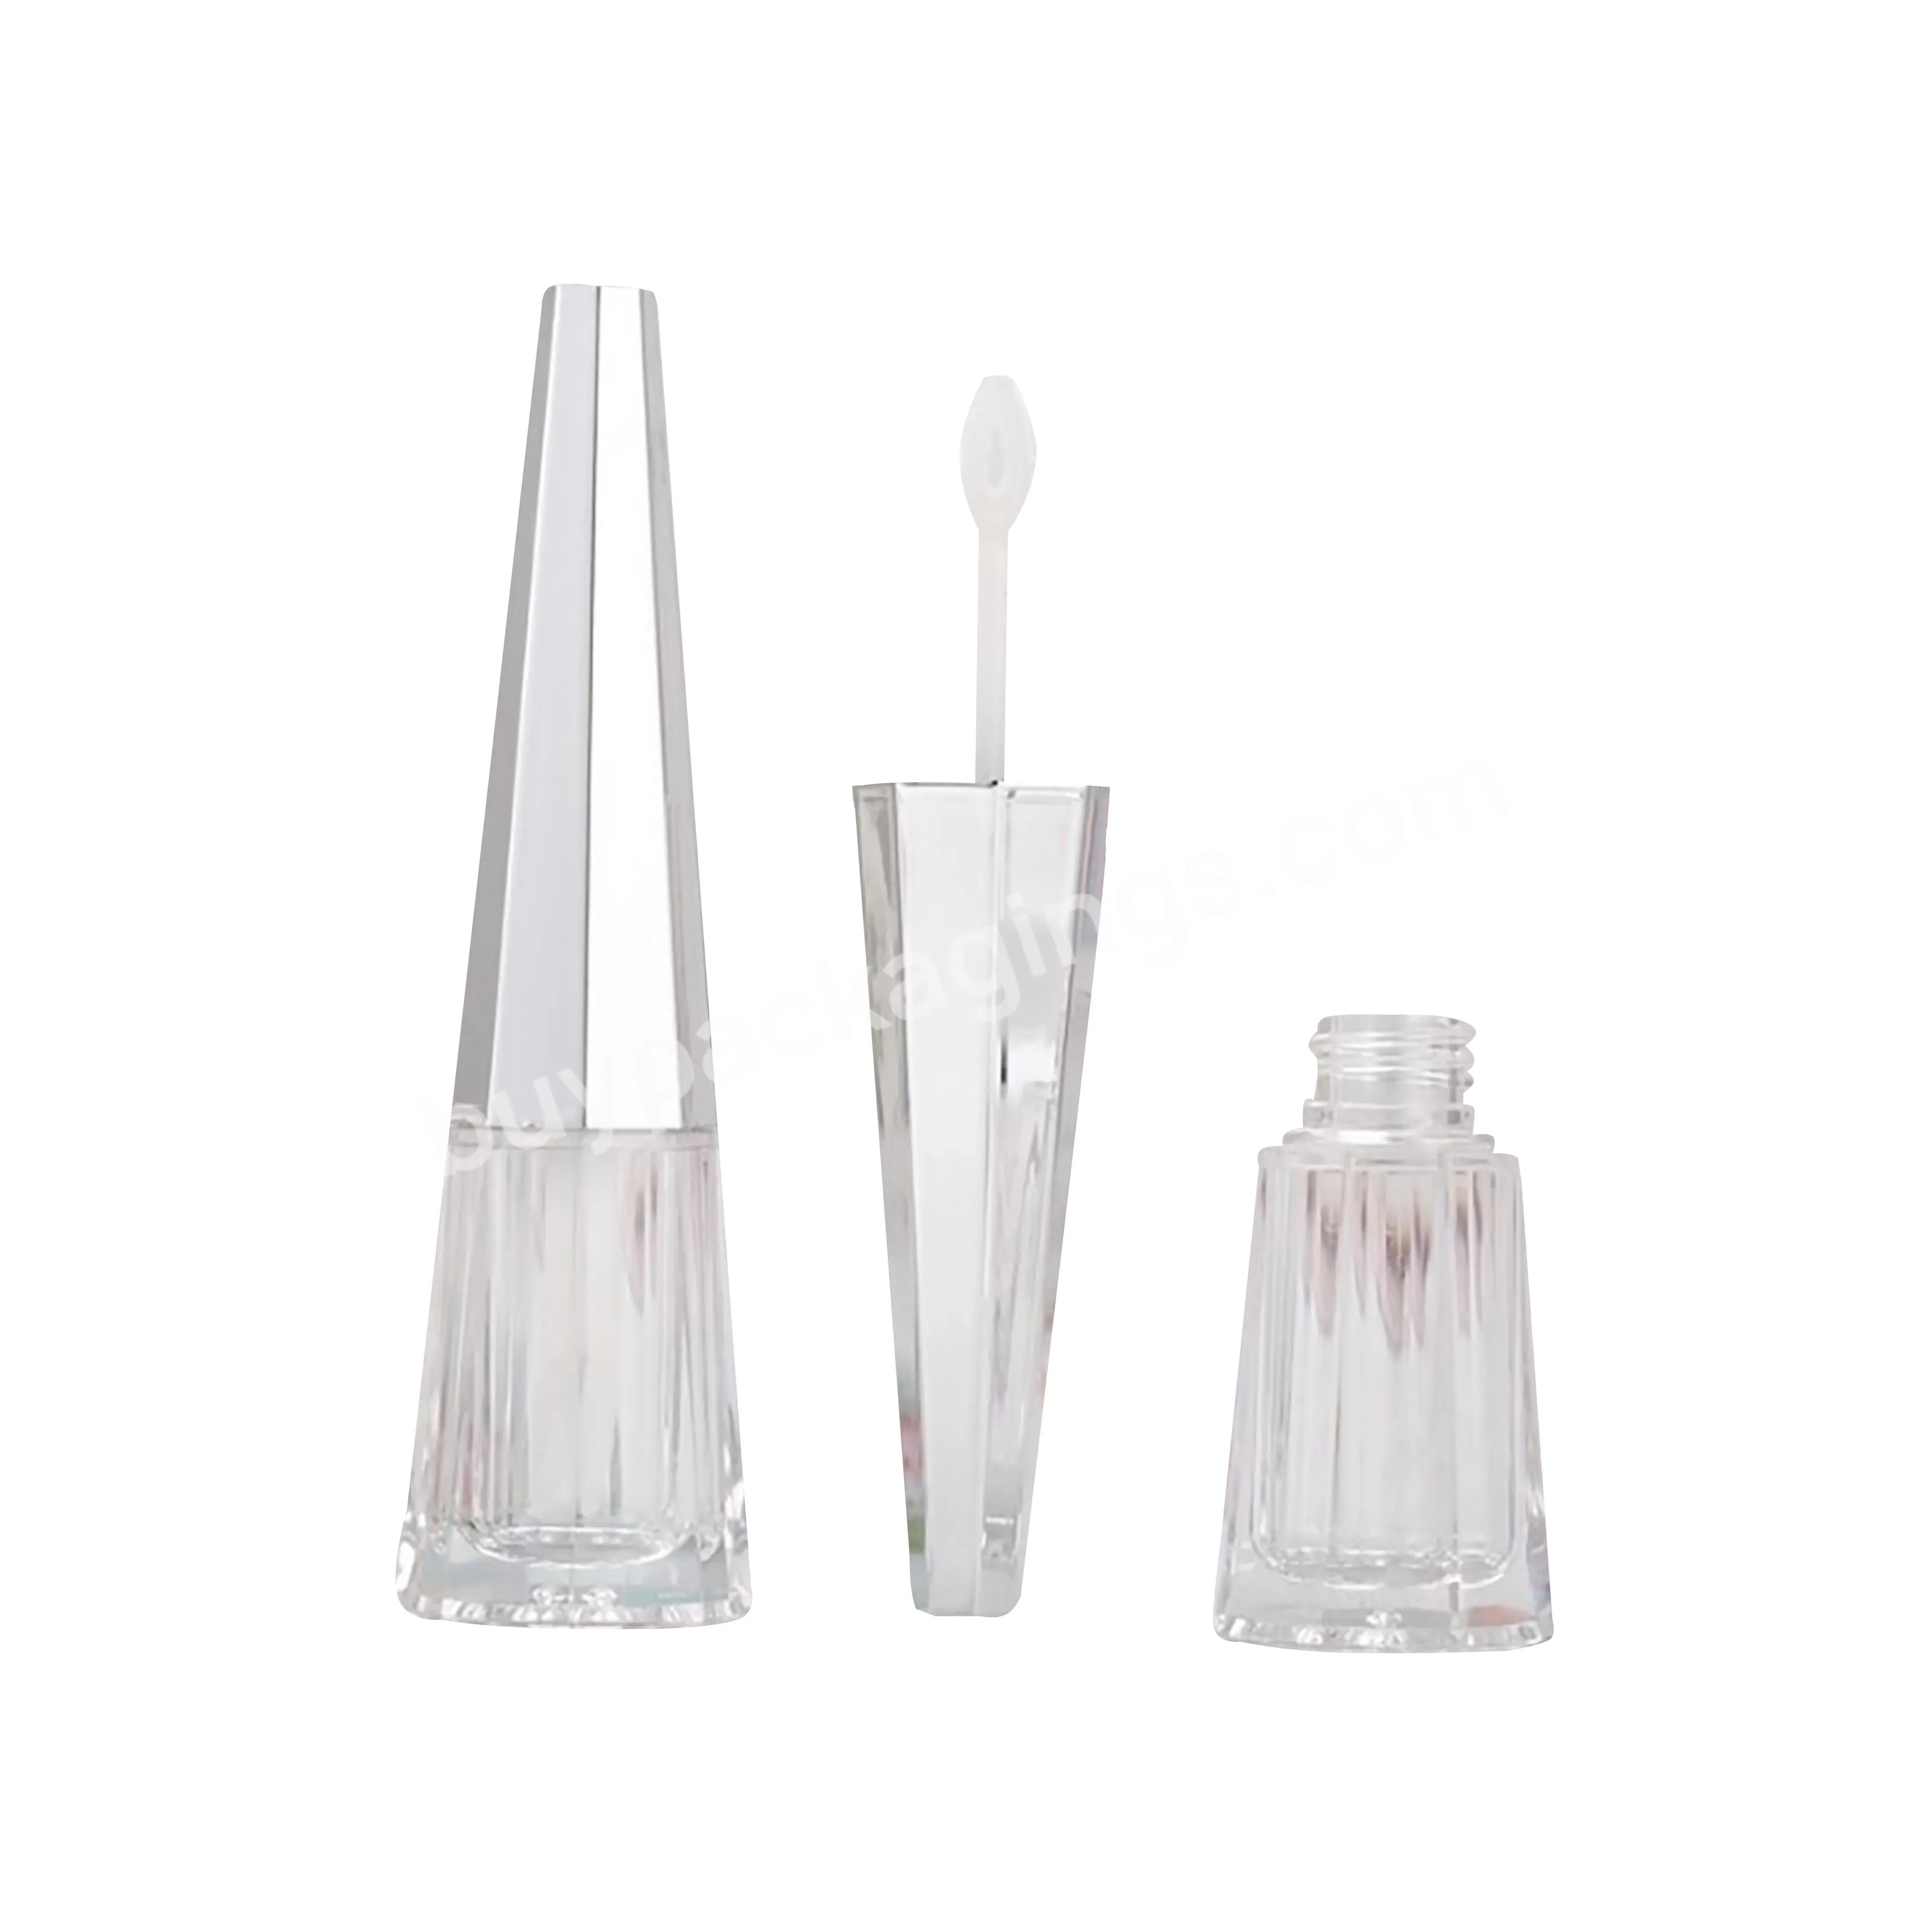 Conical Octagonal Injection Lip Glaze Tube Transparent Pink Silver Lip Gloss Empty Bottle Dyed Lip Bottle With Brush Cap - Buy Conical Octagonal Injection Lip Glaze Tube,Transparent Pink Silver Lip Gloss Empty Bottle,Dyed Lip Bottle With Brush Cap.